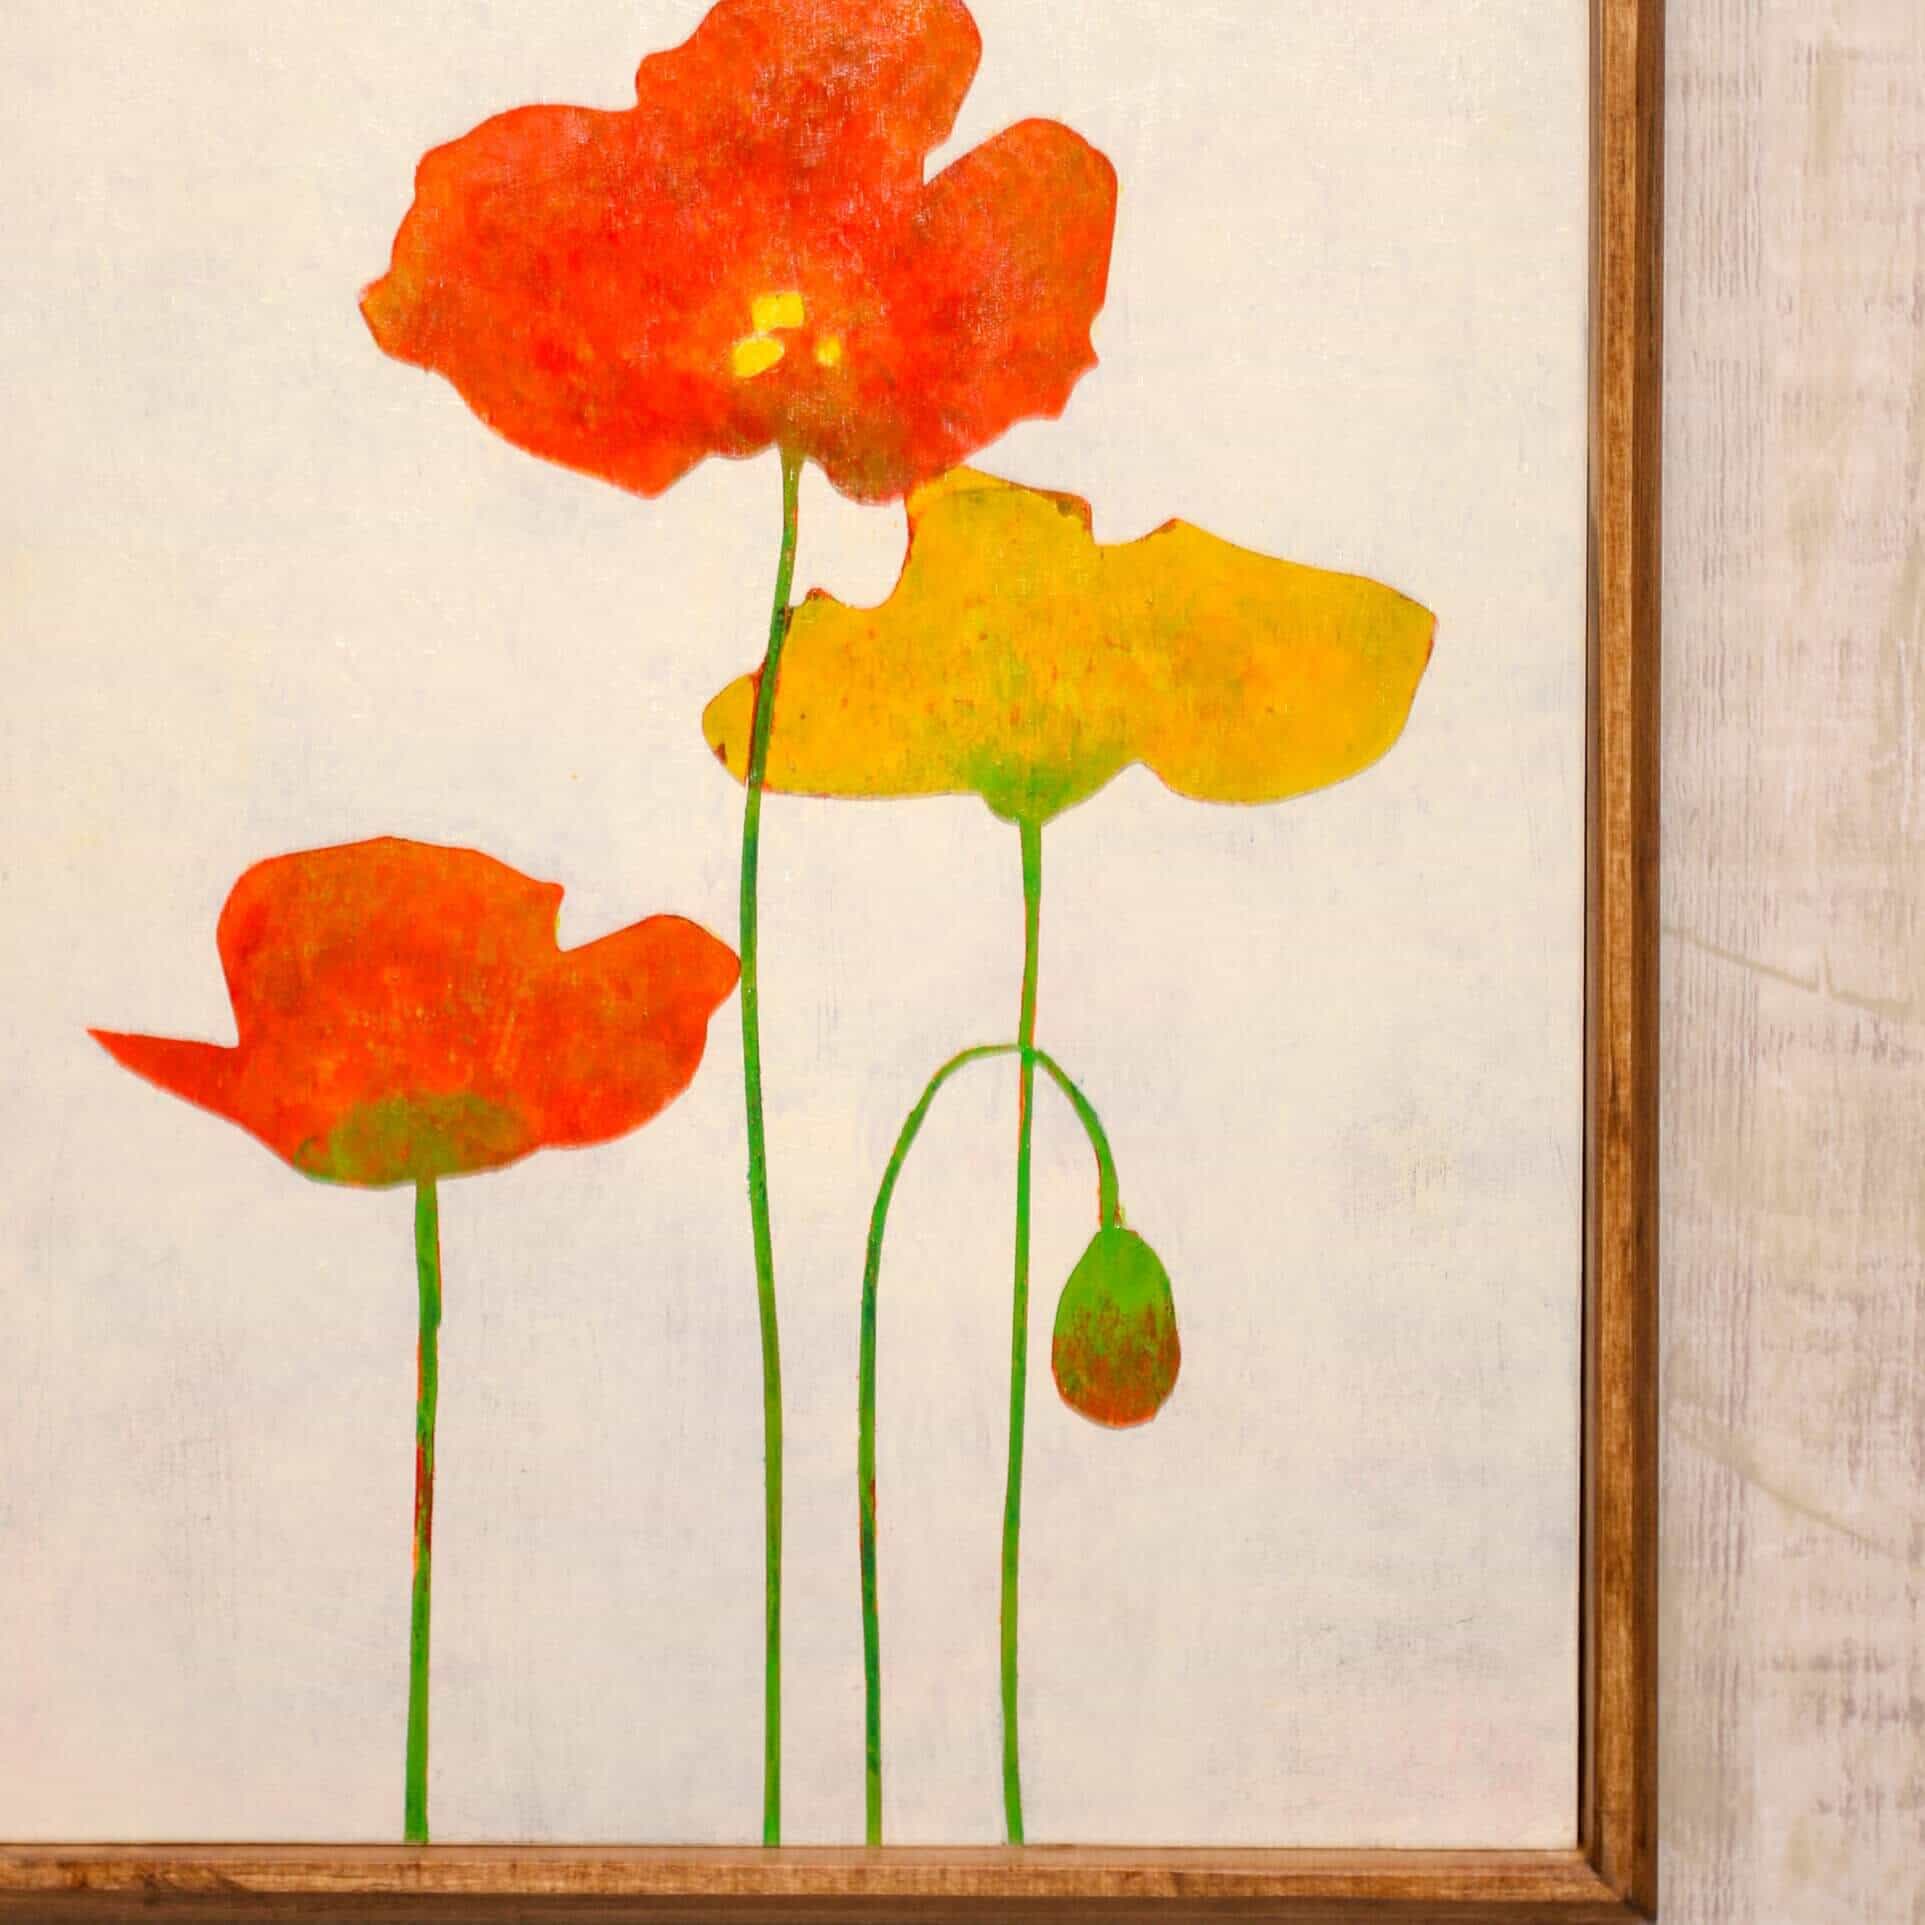 Orange and yellow poppies_A No.186-4